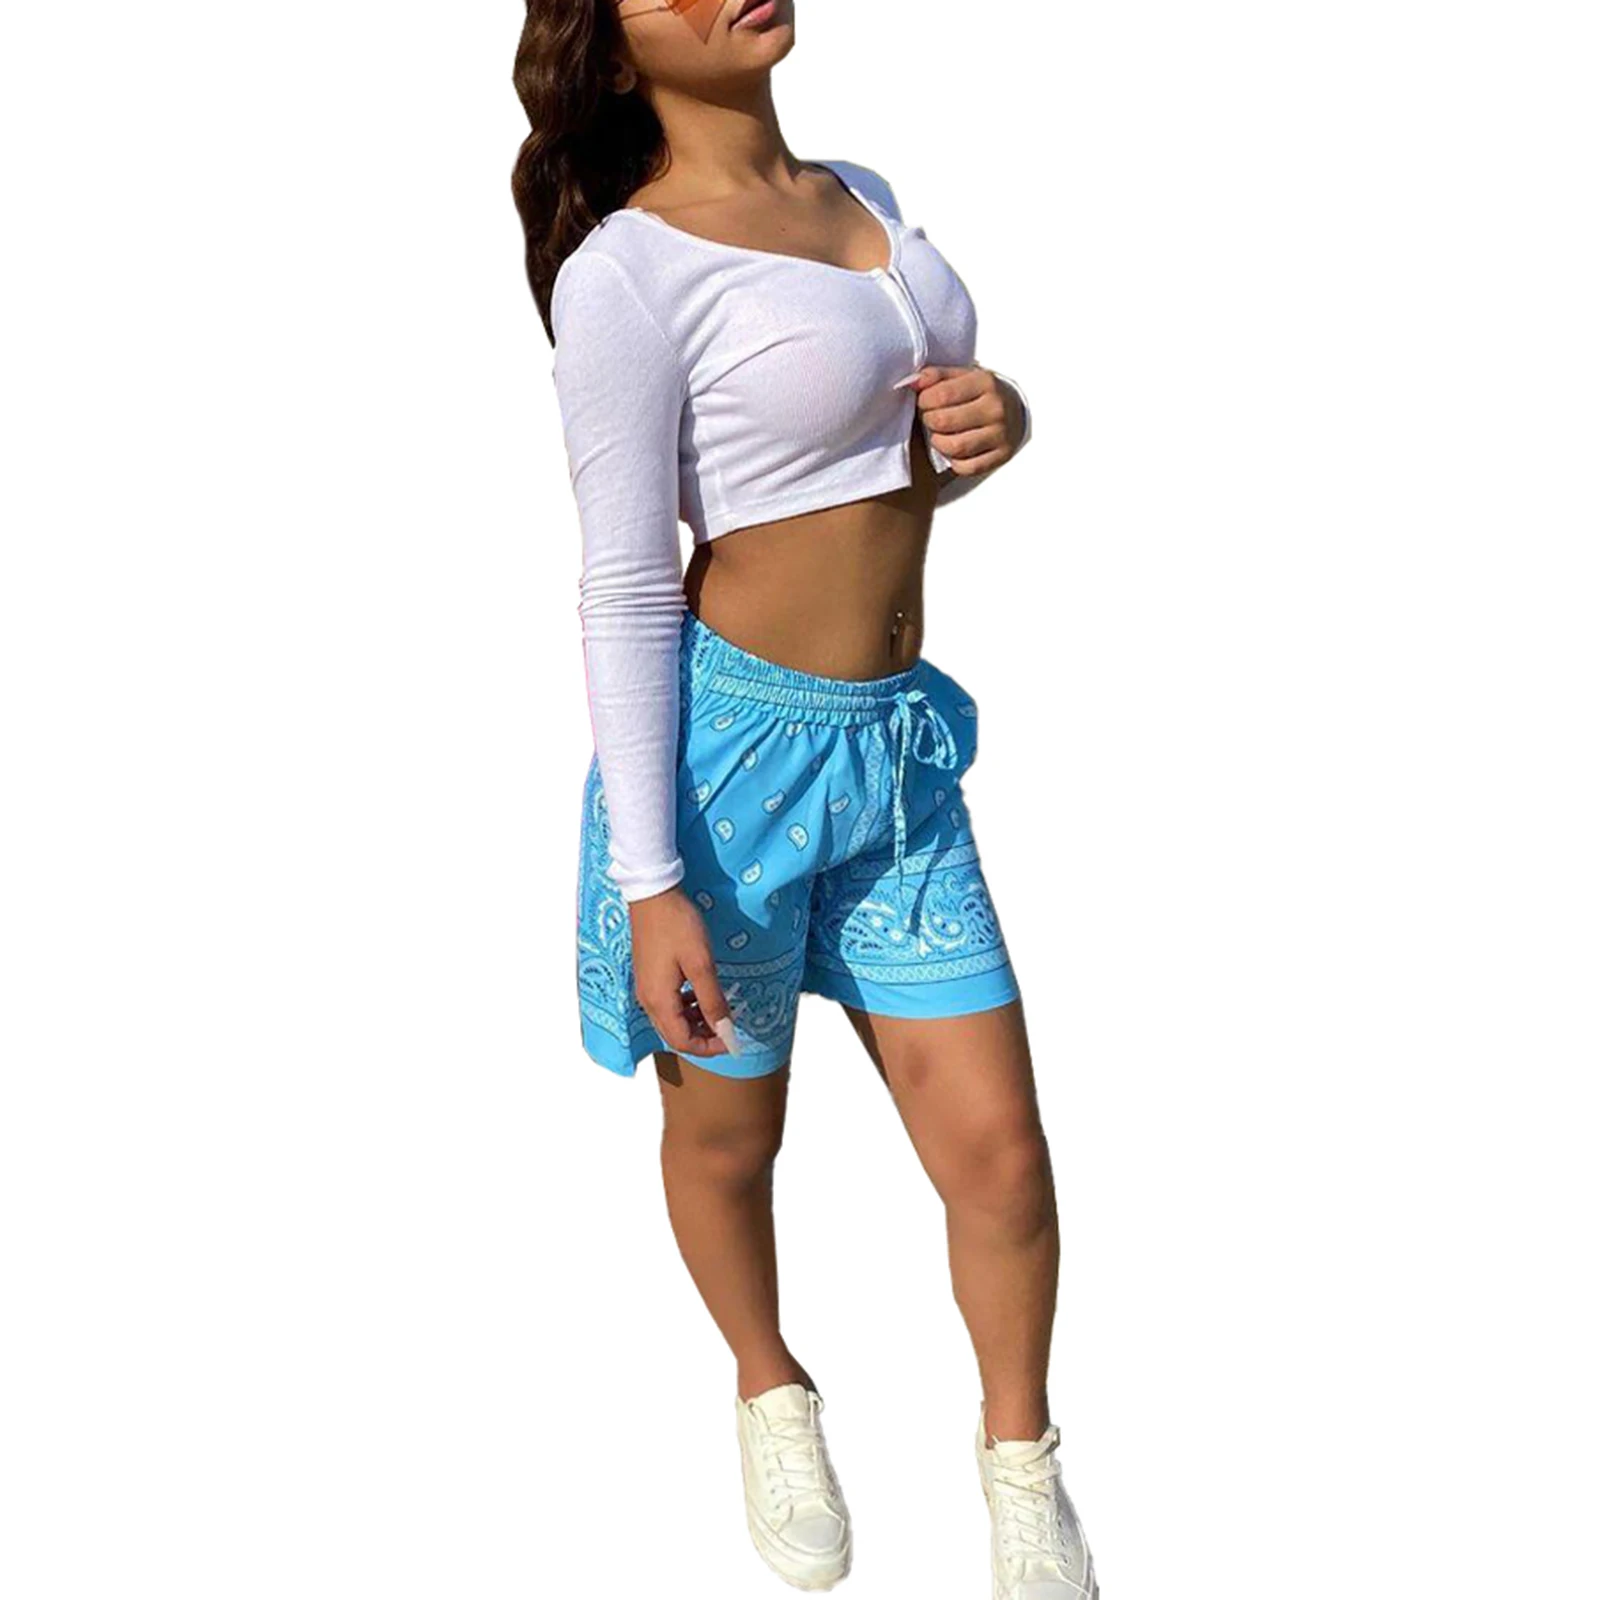 new hooters shorts Women Cashew Printing Stretch short Pants Tight High Waist Hip Hop Style Shorts Casual Loose Lace-up Clothing nike pro shorts